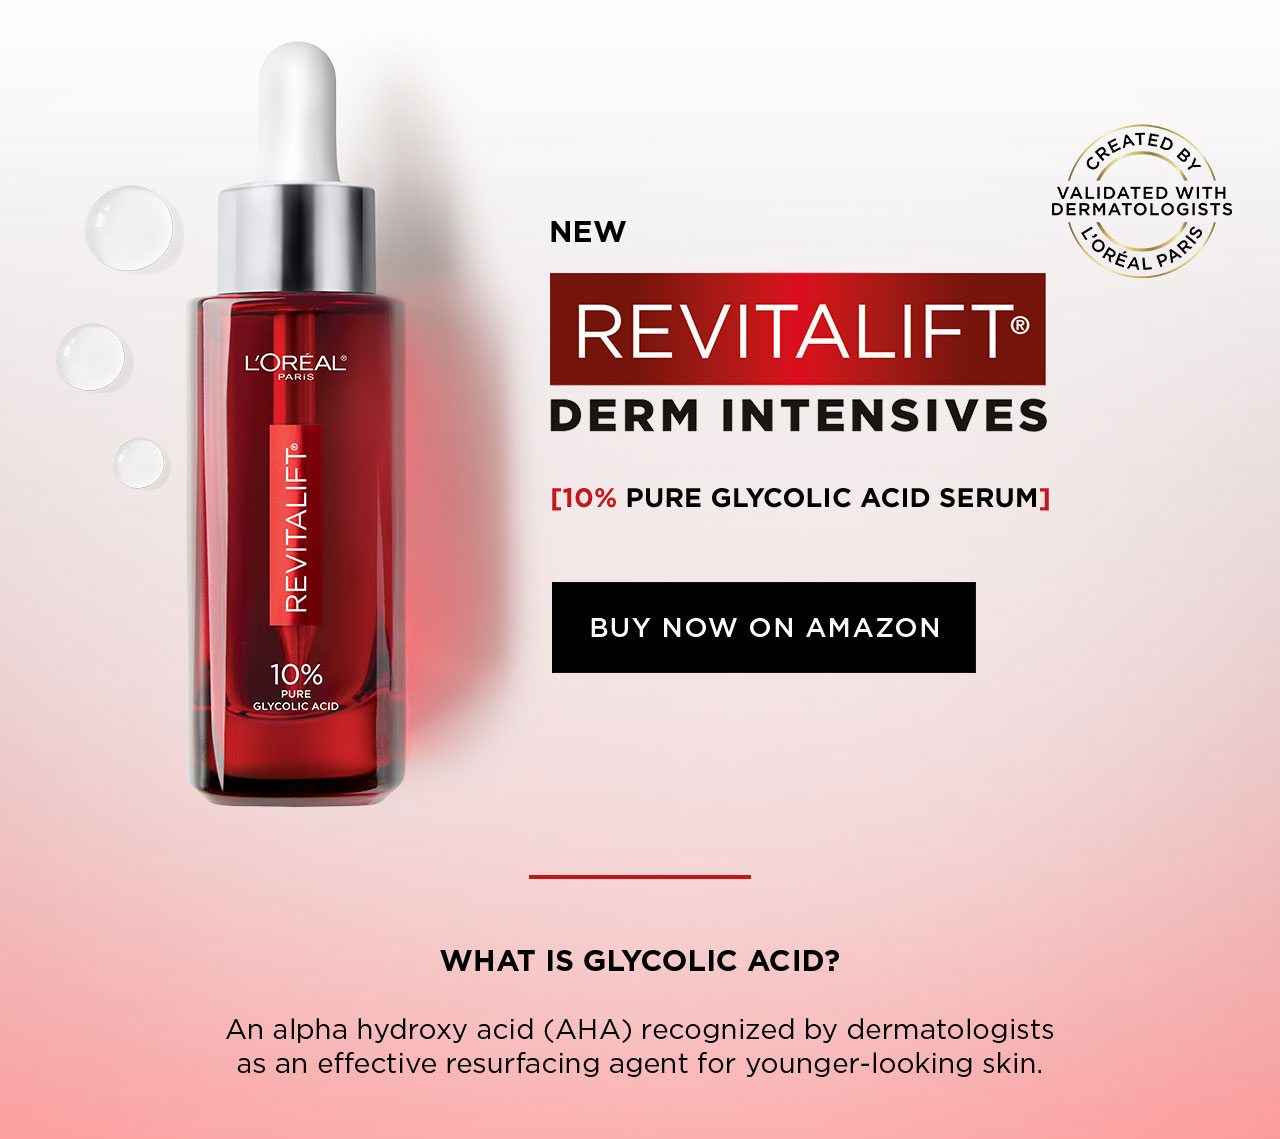 NEW - REVITALIFT® DERM INTESIVES - 10 PERCENT PURE GLYCOLIC ACID SERUM - BUY NOW ON AMAZON - CREATED BY L'ORÉAL PARIS - VALIDATED WITH DERMATOLOGISTS - WHAT IS GLYCOLIC ACID? - An alpha hydroxy acid (AHA) recognized by dermatologists as an effective resurfacing agent for younger-looking skin.